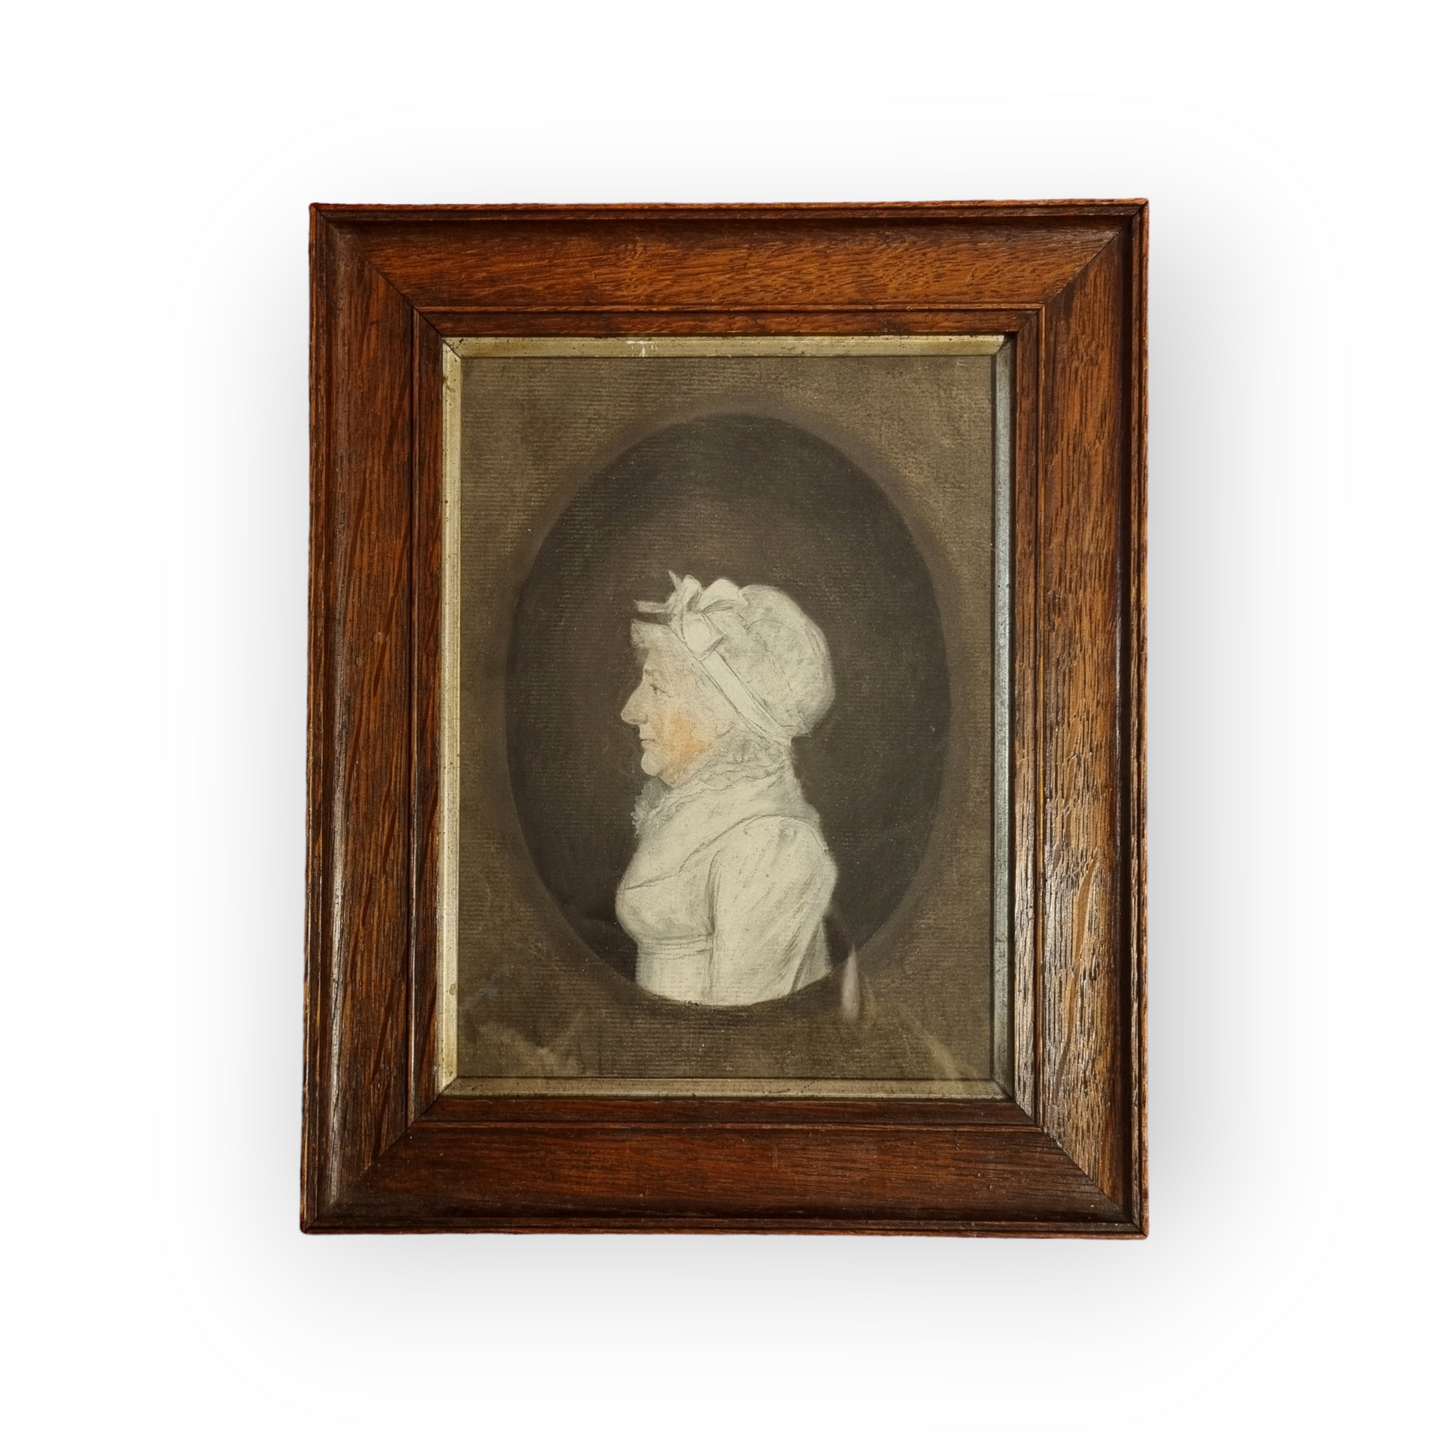 An Early 19th Century English School Antique Watercolour Portrait Painting of a Lady